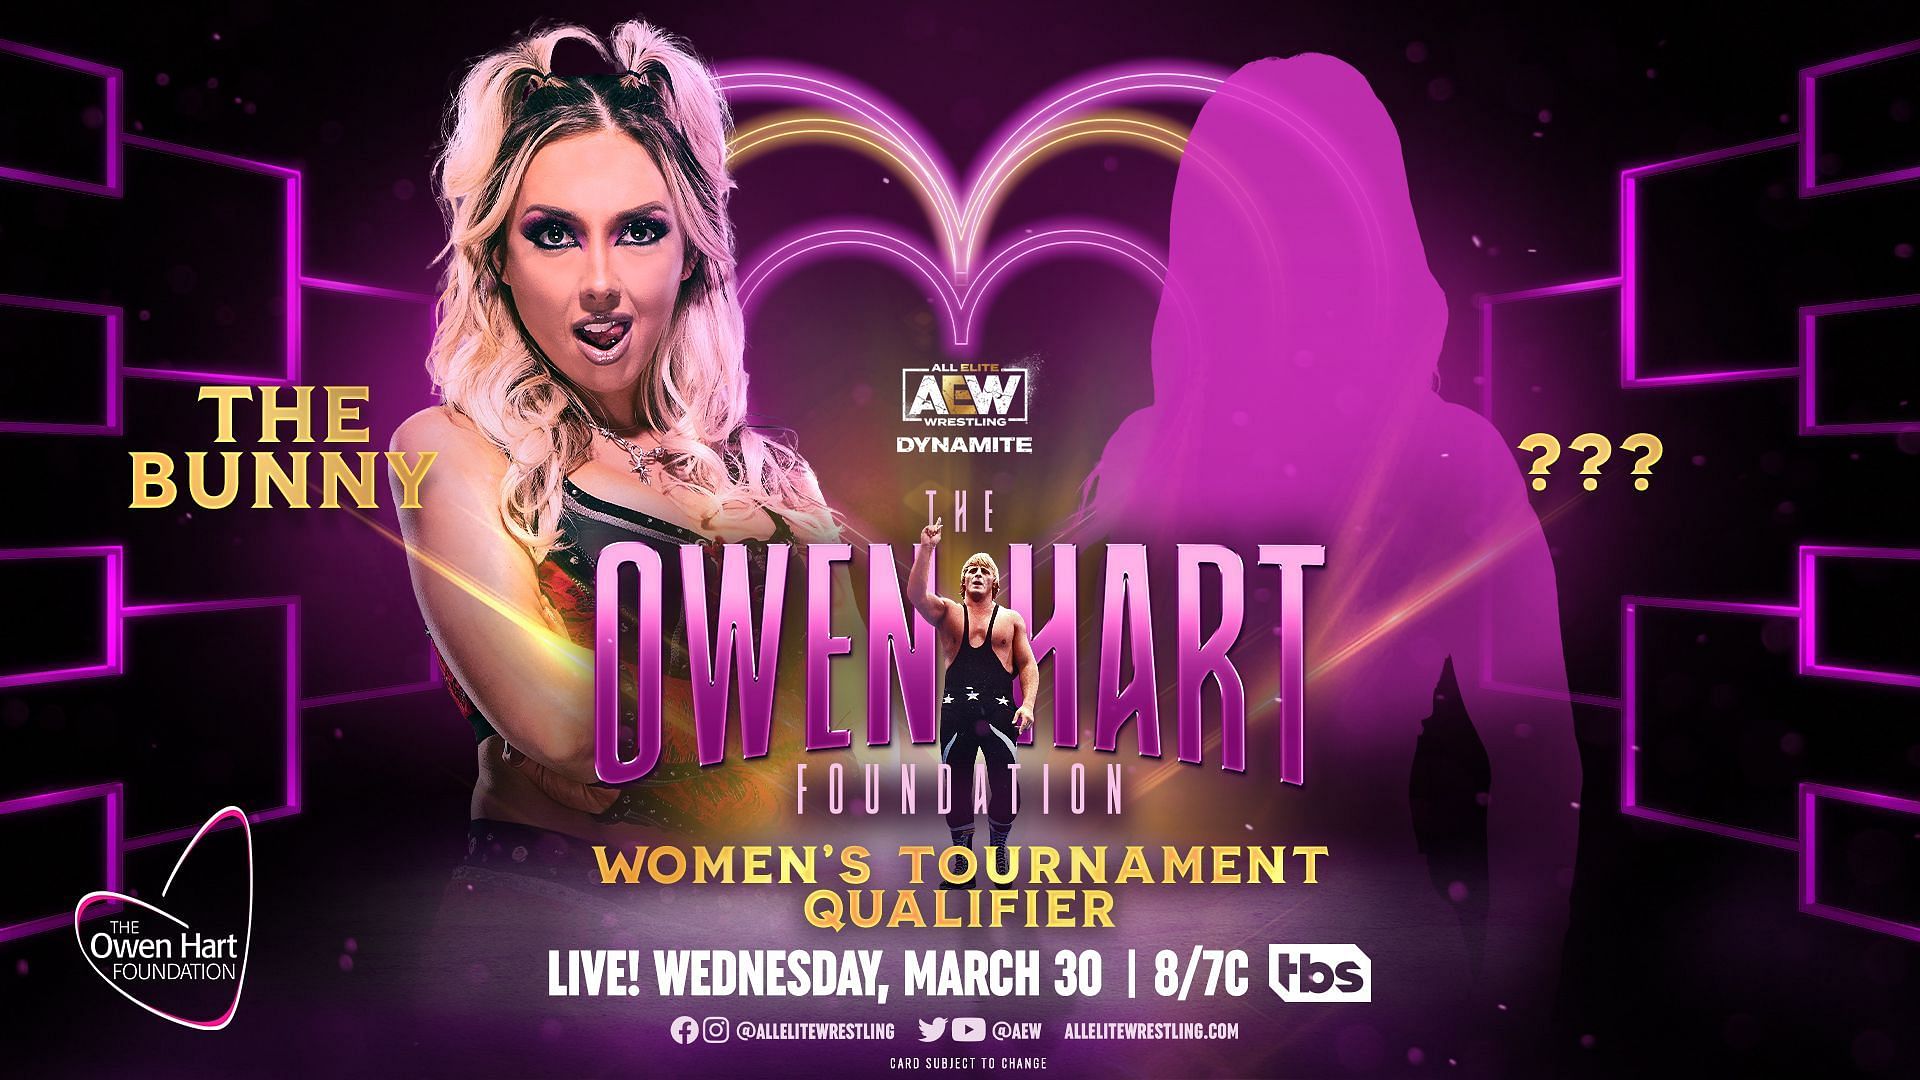 The Bunny will be facing the latest AEW signee.